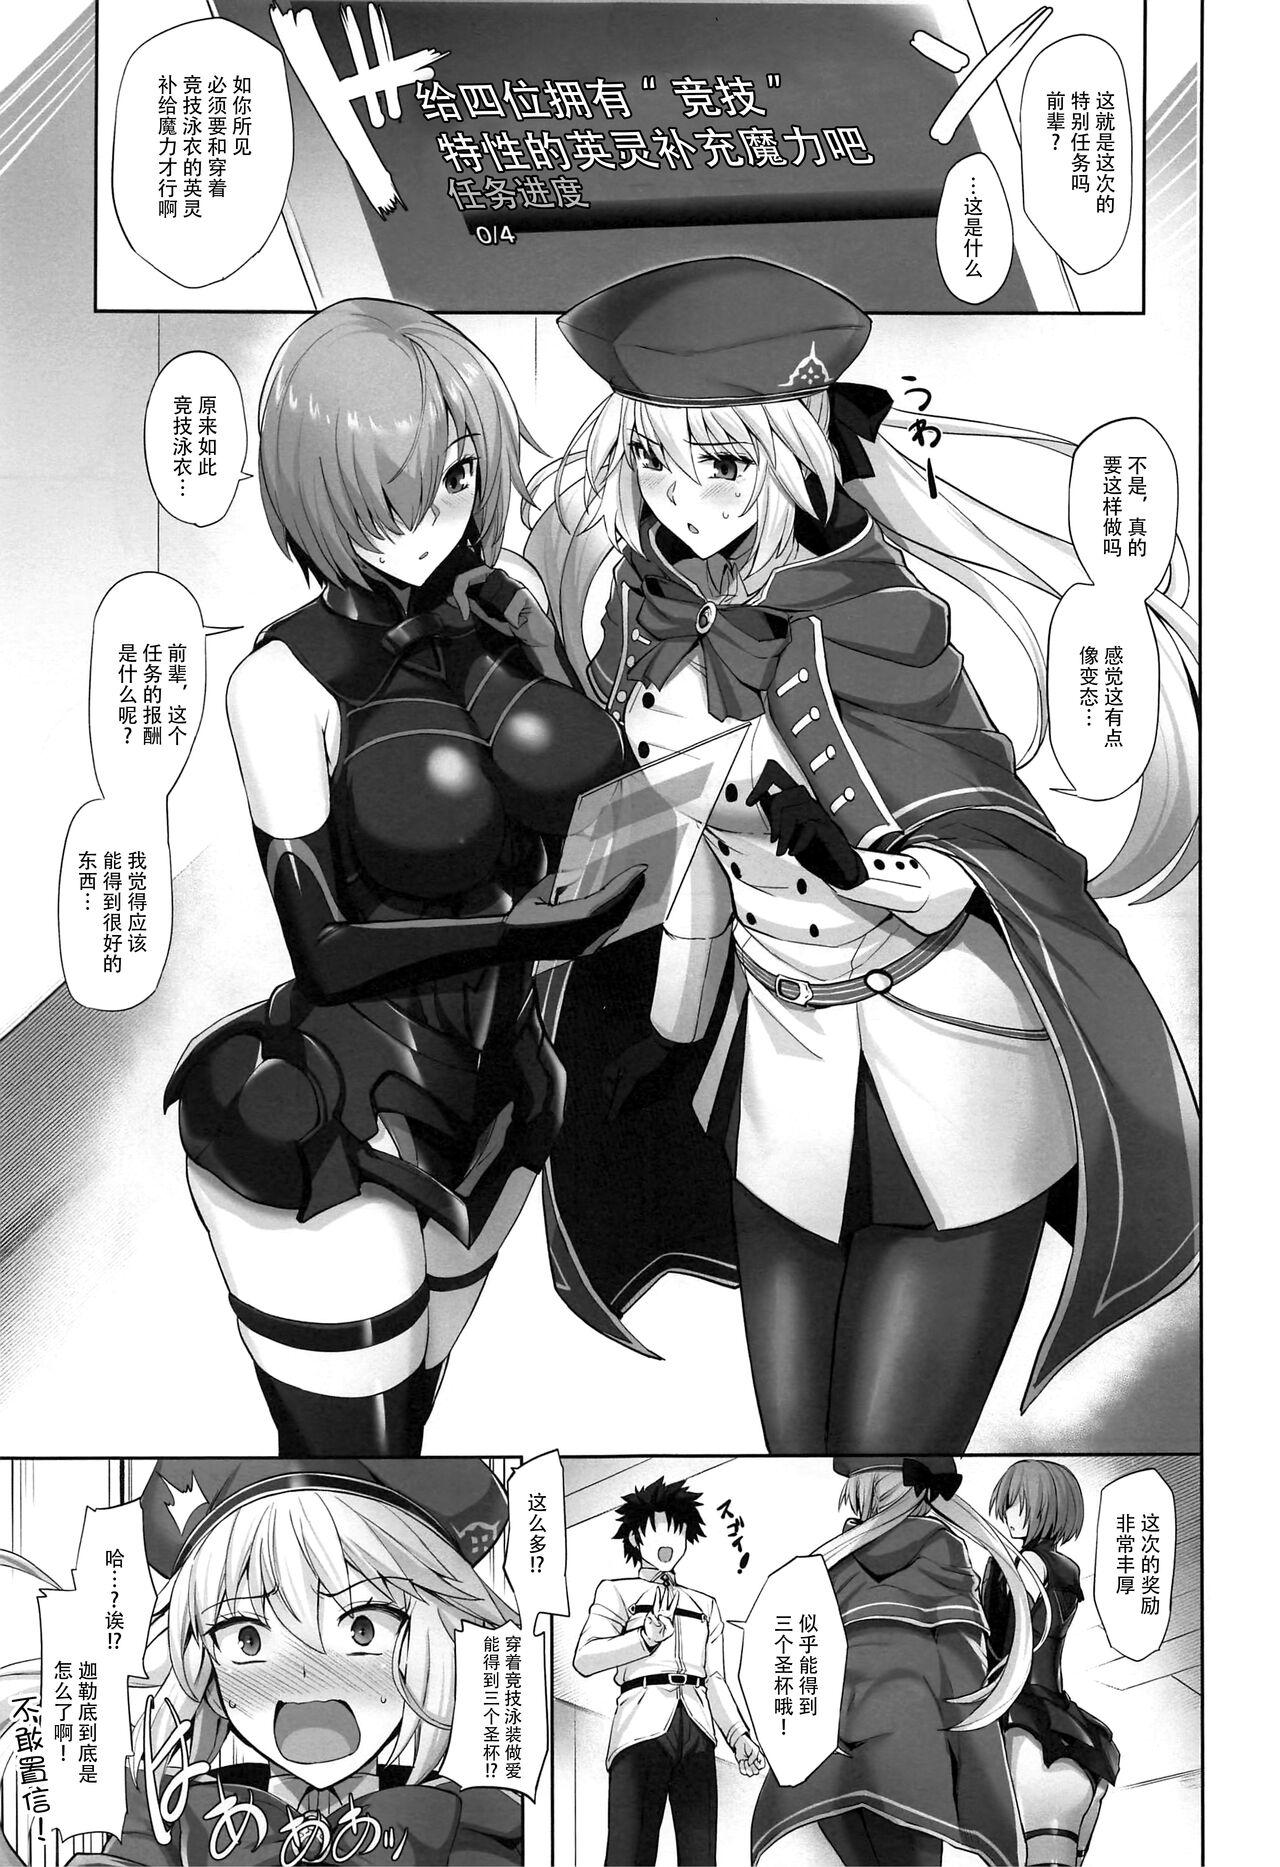 Real Amateurs Kyouei Tokusei no Servant to 2 - Fate grand order Jacking Off - Page 2